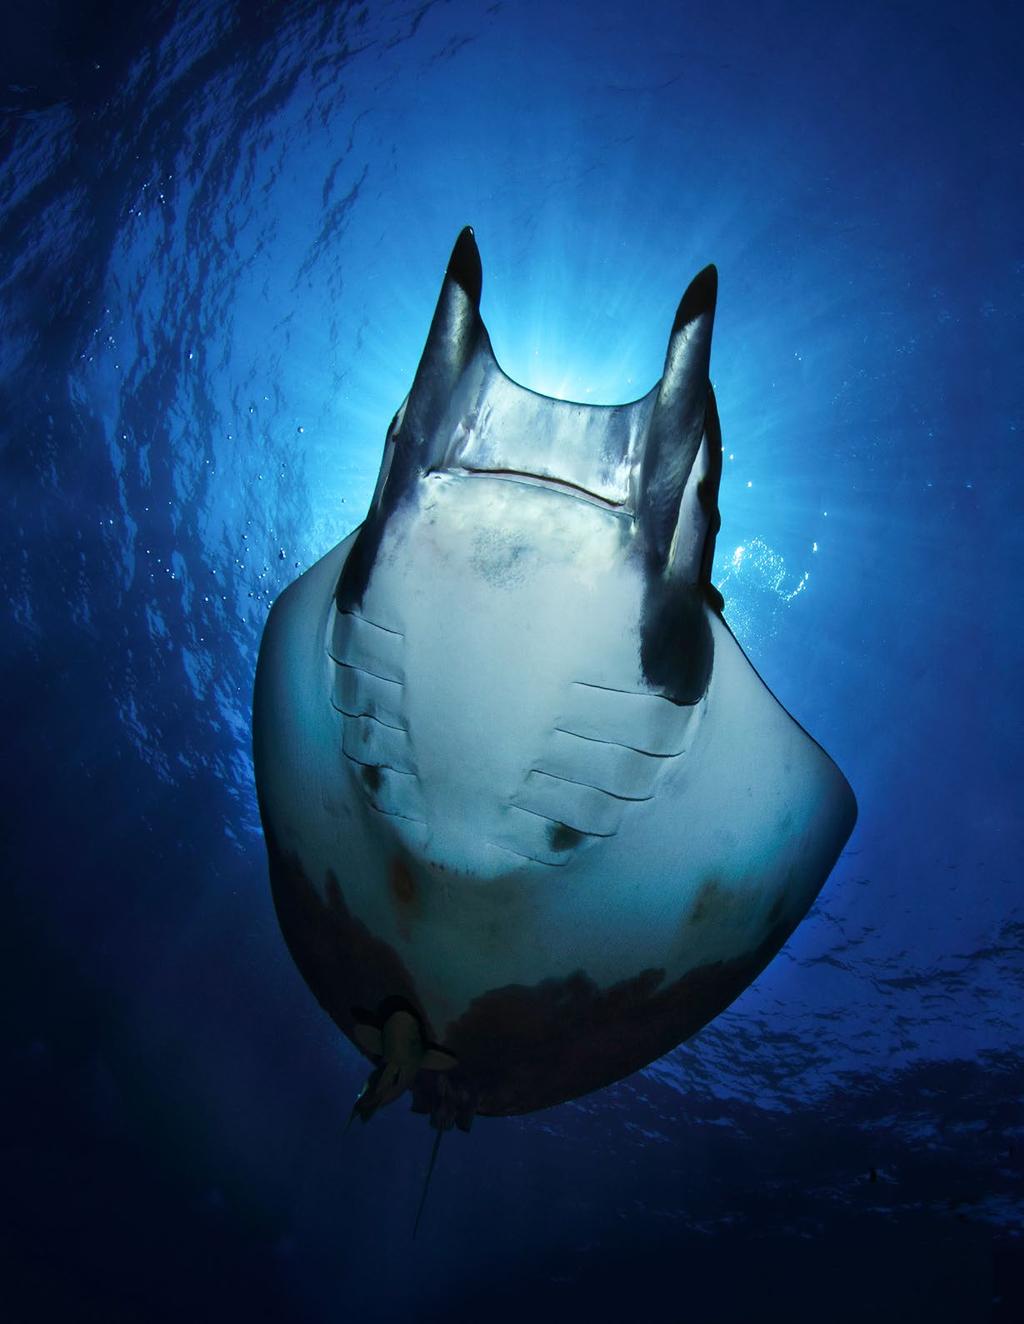 Photographer Nuno Sá captured this image of the underside of an 8-foot-long Chilean devil ray (Mobula